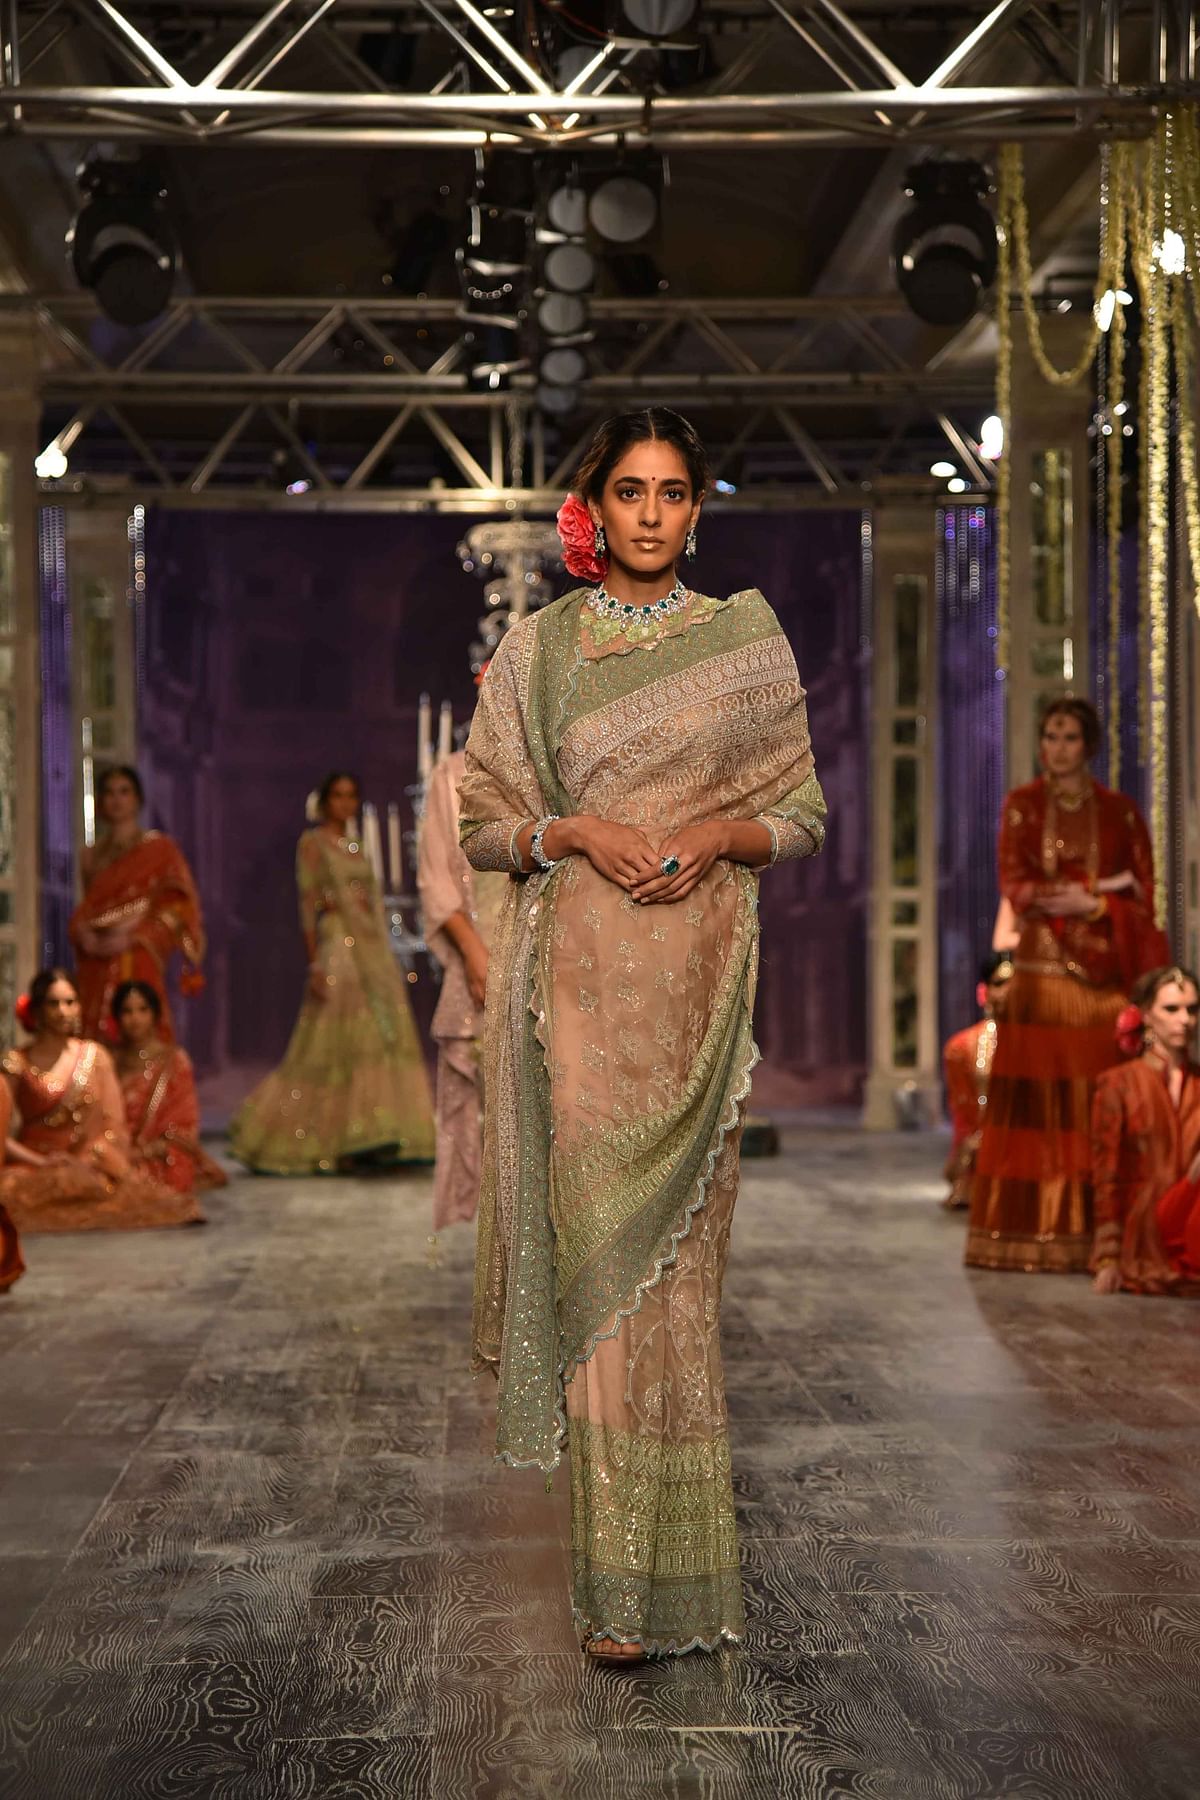 Anita Dongre and Tarun Tahiliani show what couture is.